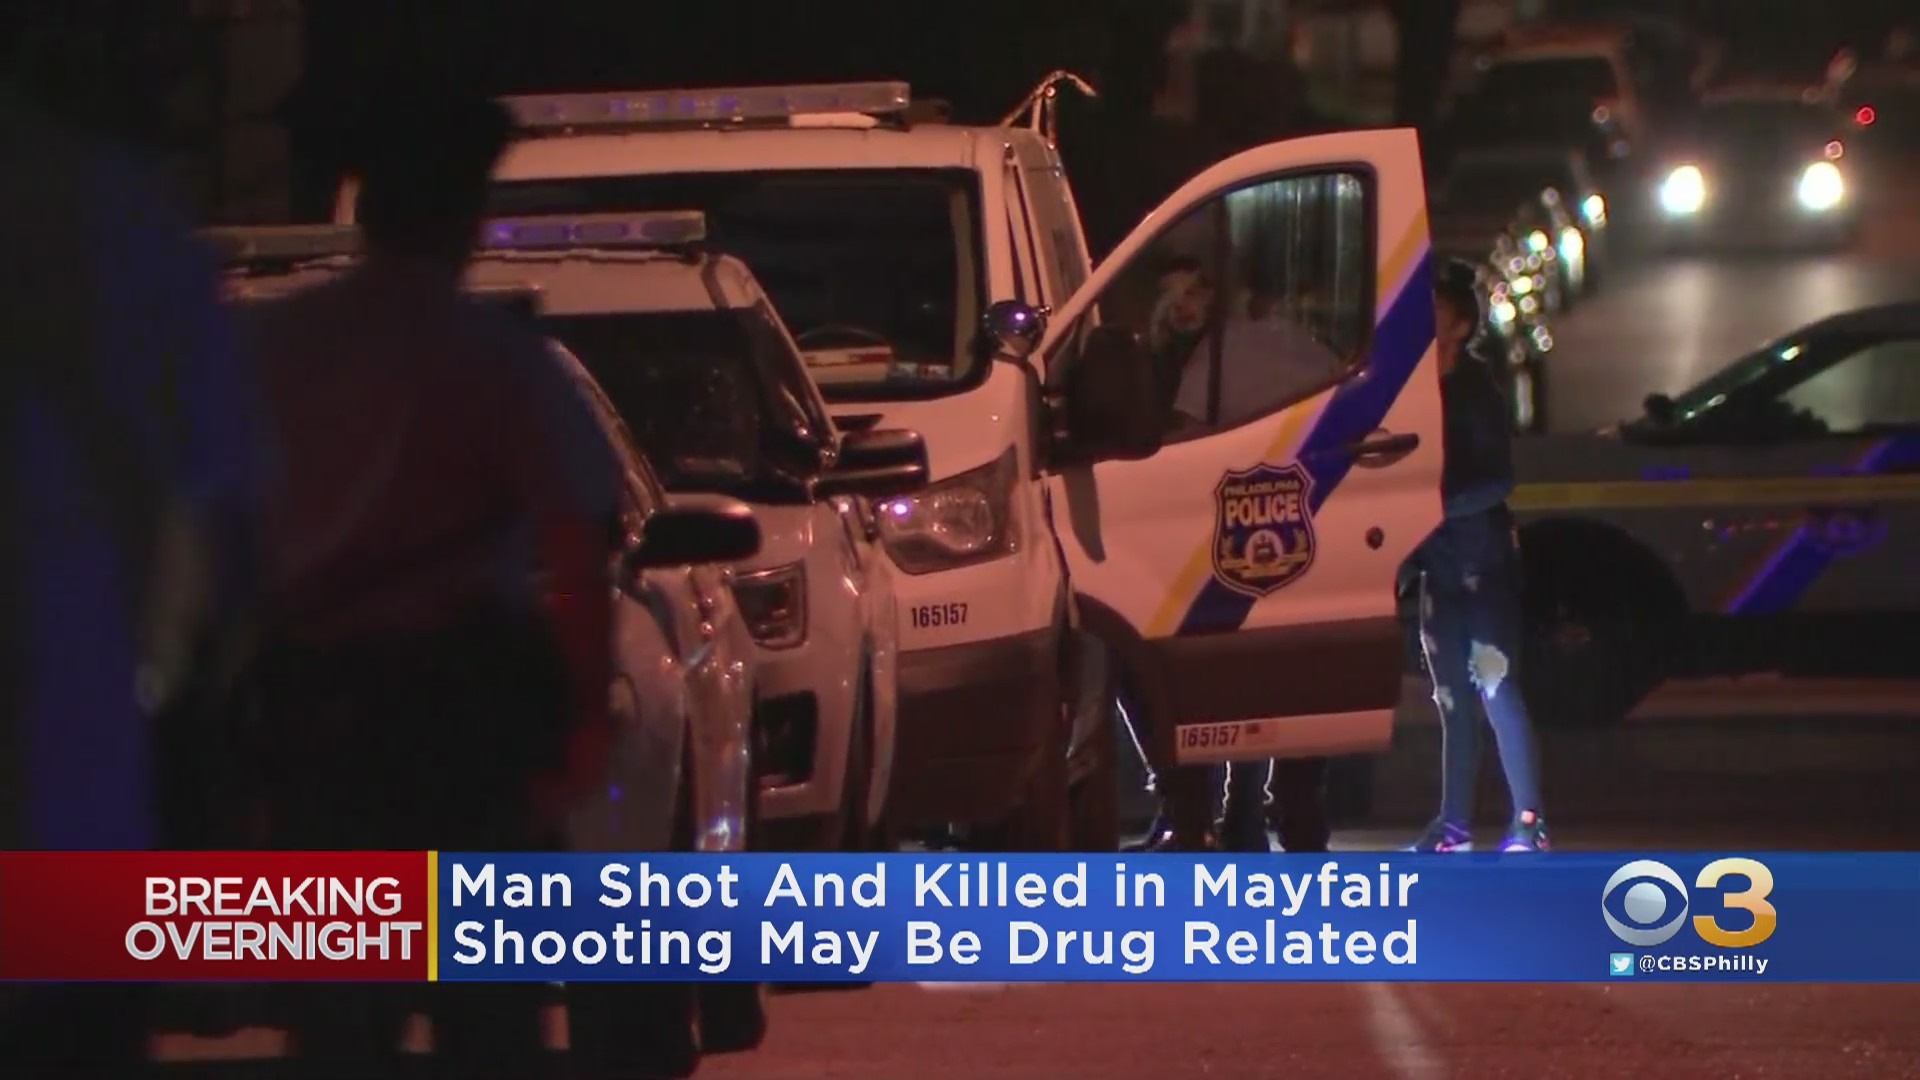 Police: Man Shot, Killed In Mayfair, Possibly Drug-Related